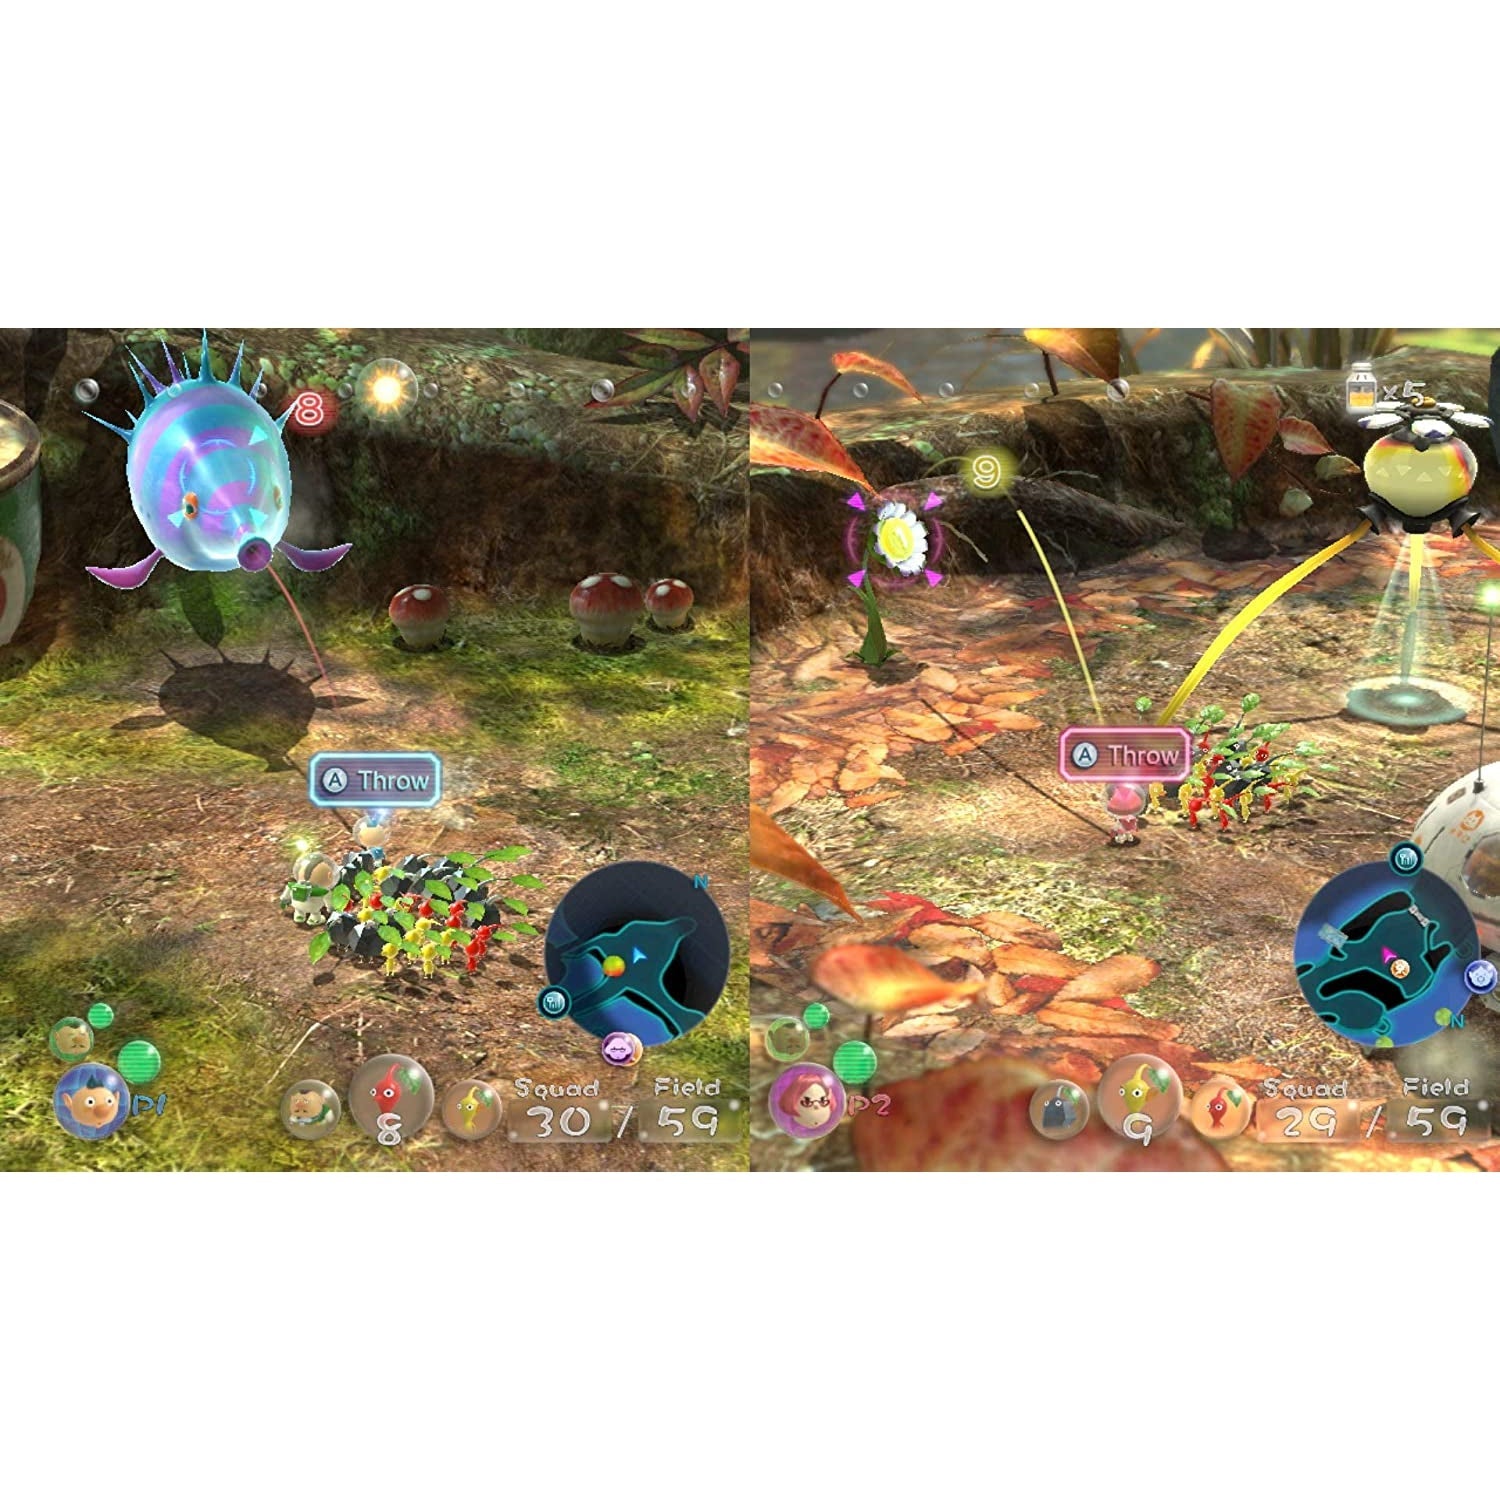 [Cartridge Only] Pikmin 3 Deluxe (Nintendo Switch)